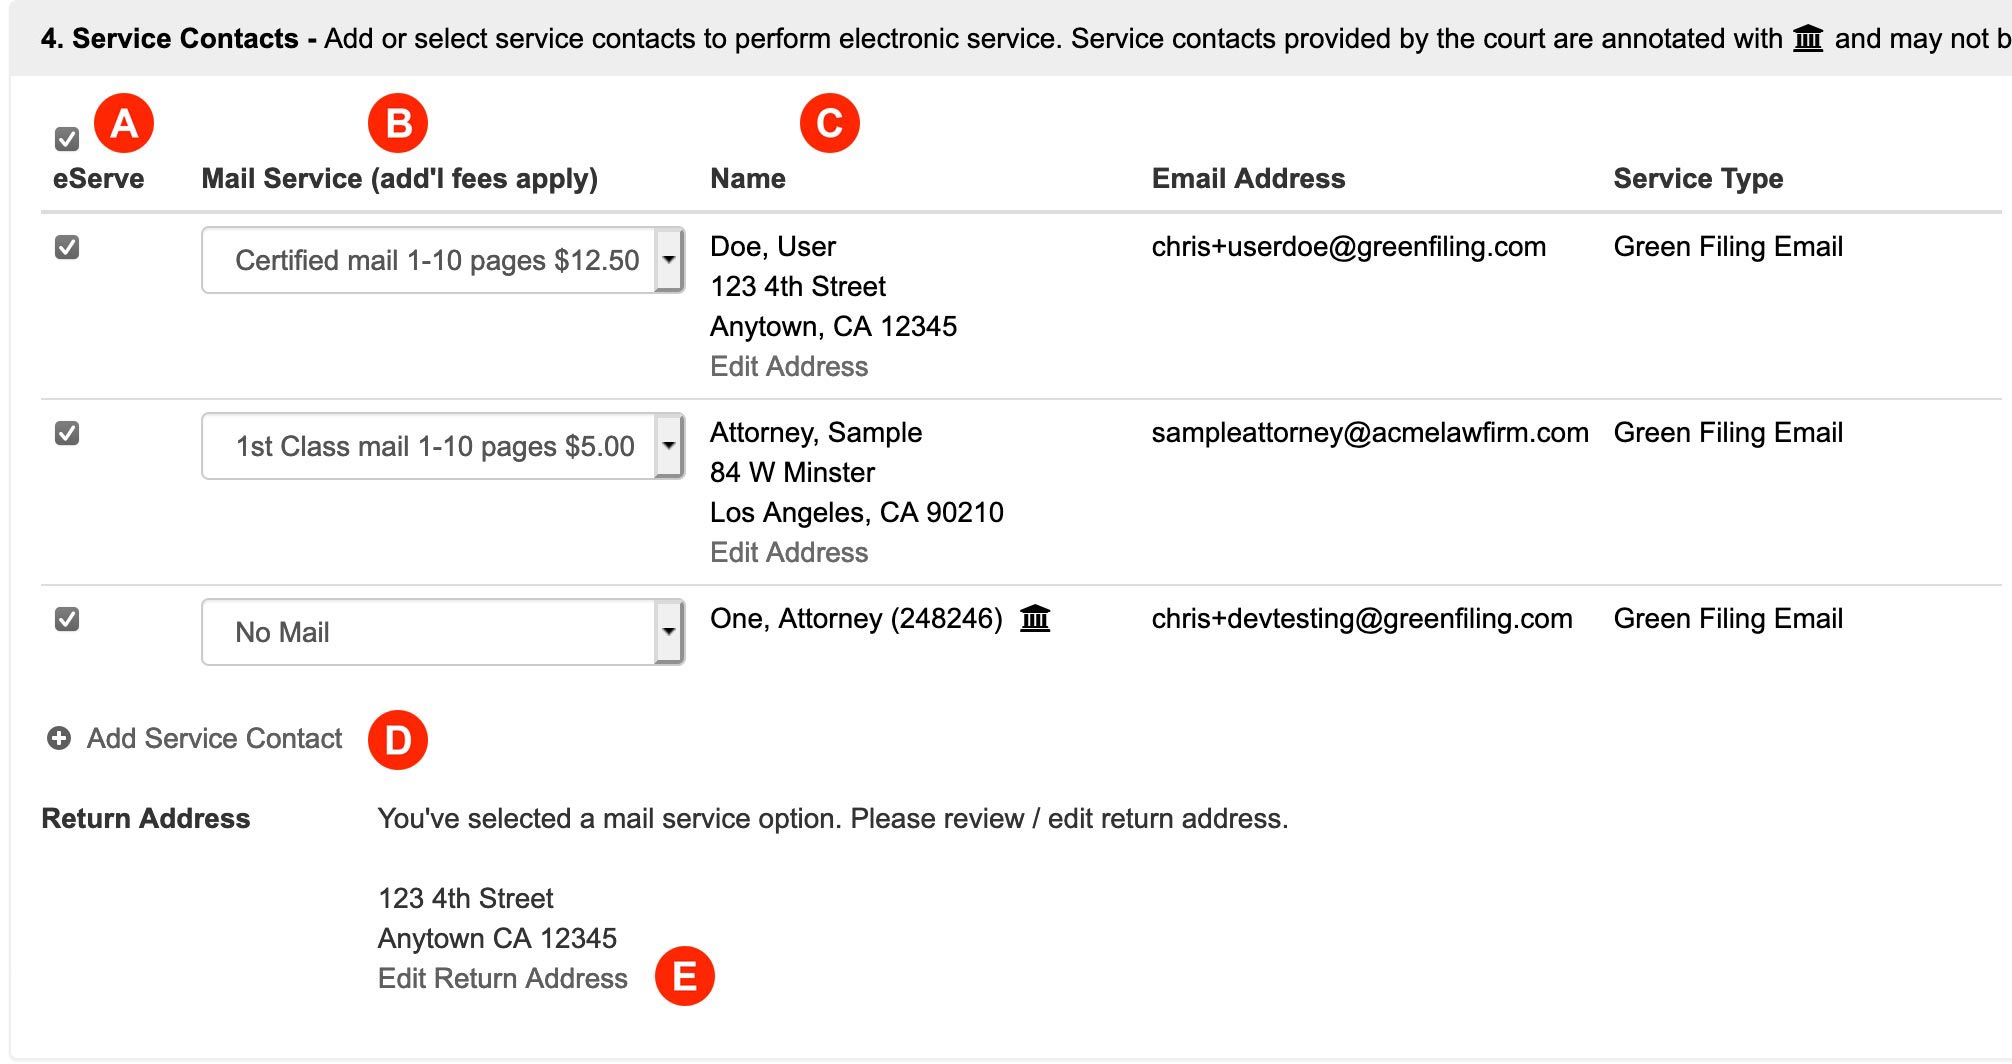 Service Contacts